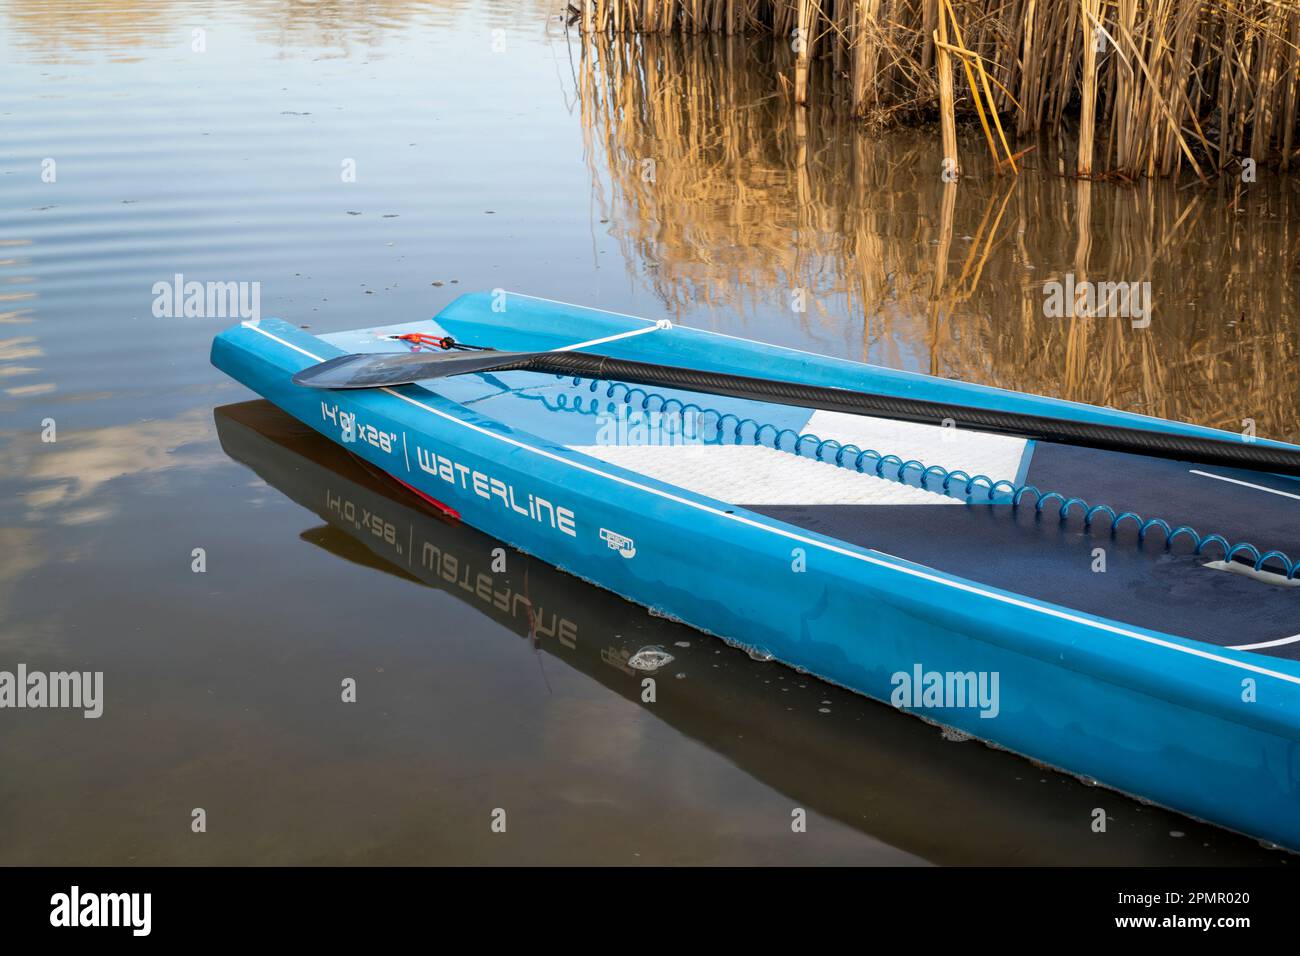 Fort Collins, CO, USA - March 30, 2023: Tail of a touring stand up paddleboard designed for flatwater (2023 Waterline model by Starboard) on a lake sh Stock Photo